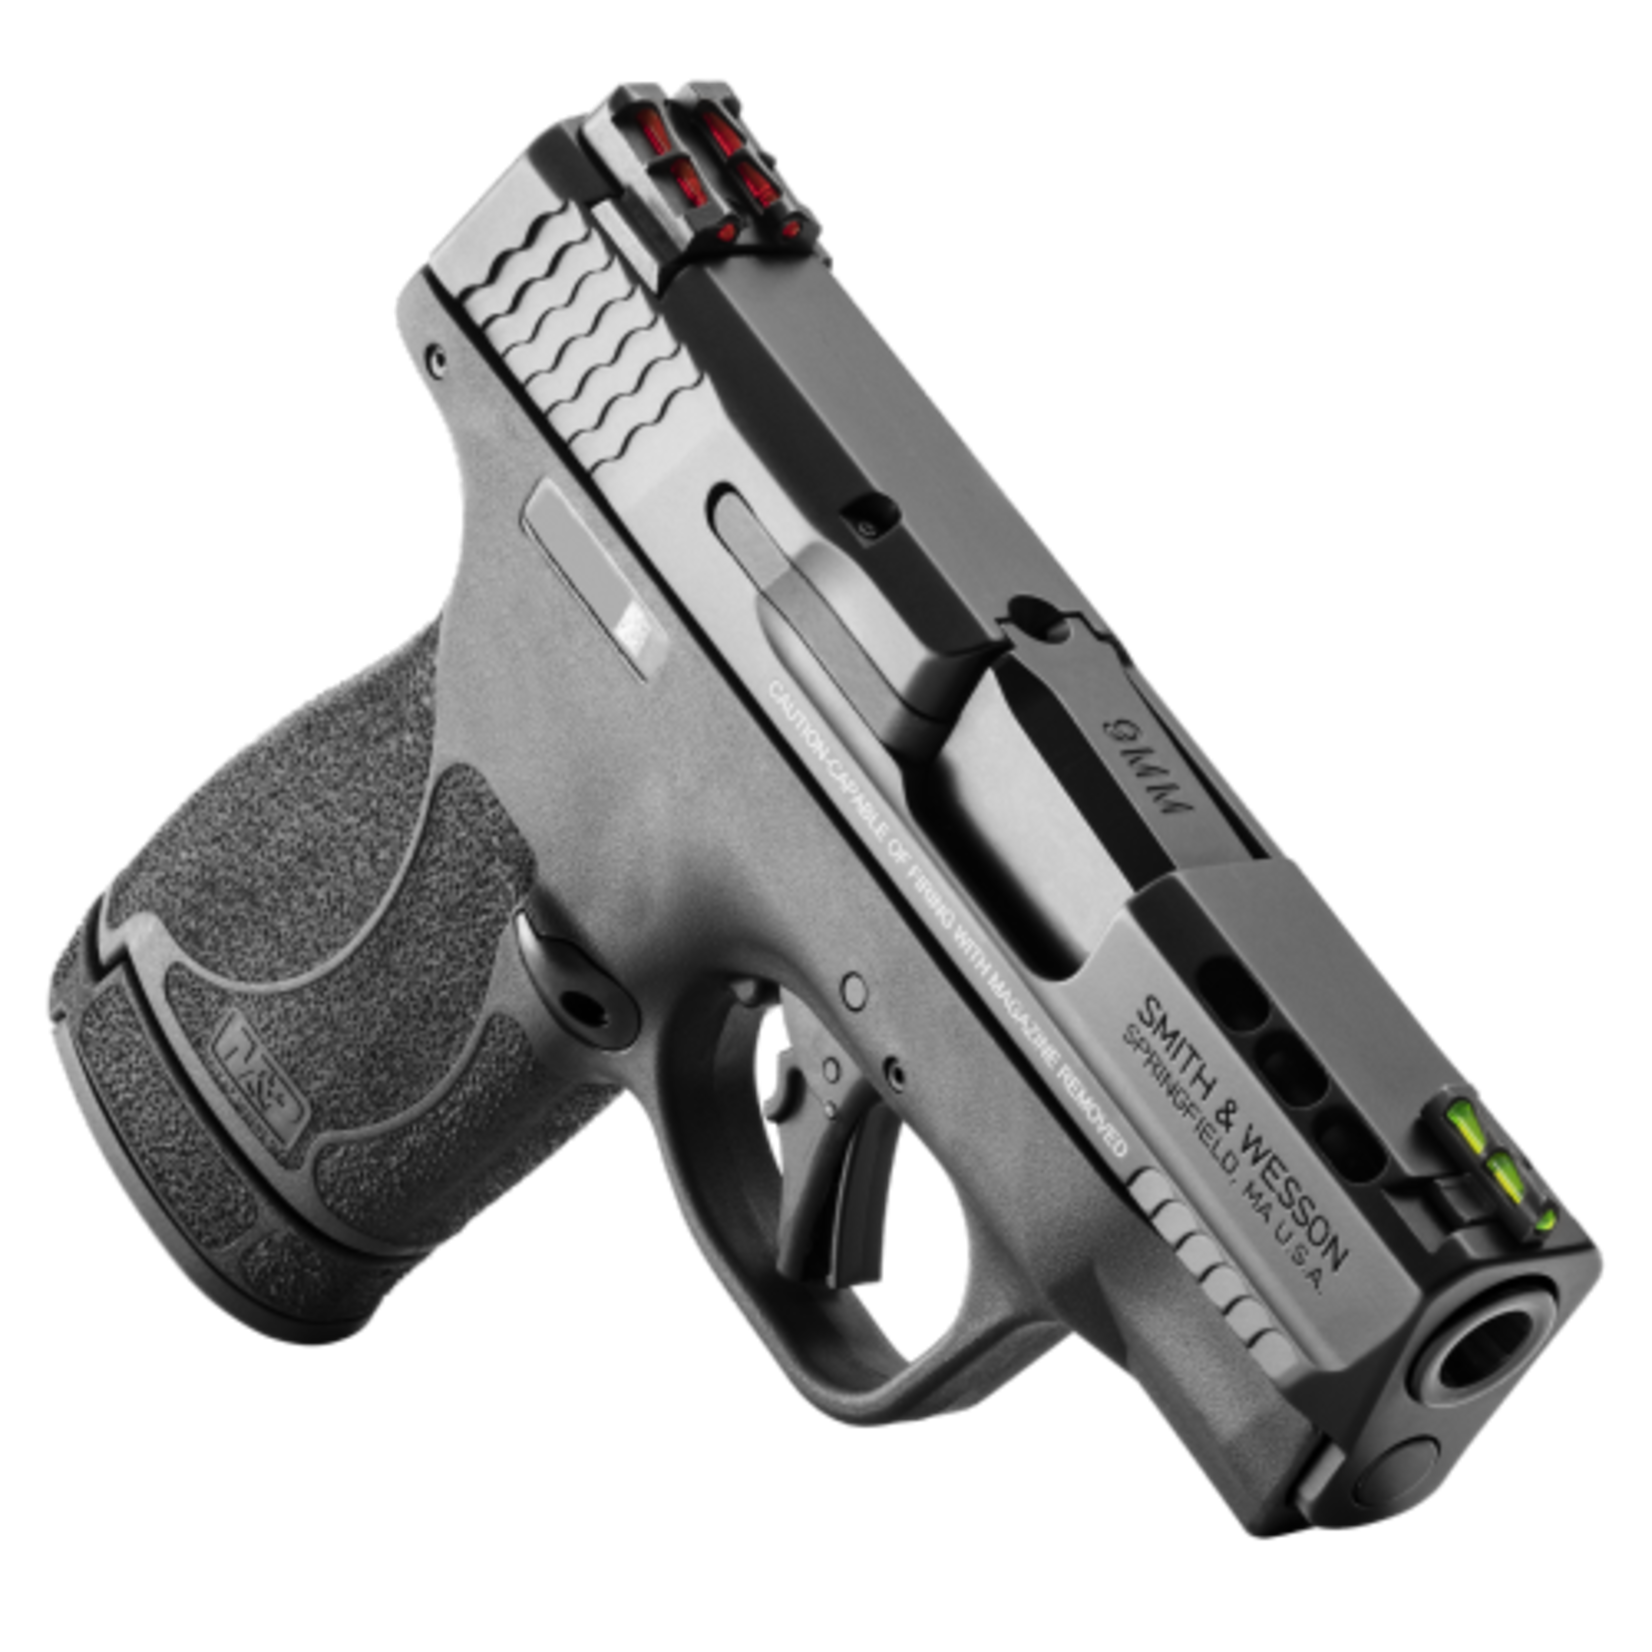 Smith and Wesson S&W M&P9 Shield Plus Performance Center - 13rnd - HiViz Sights - Everyday Carry Kit